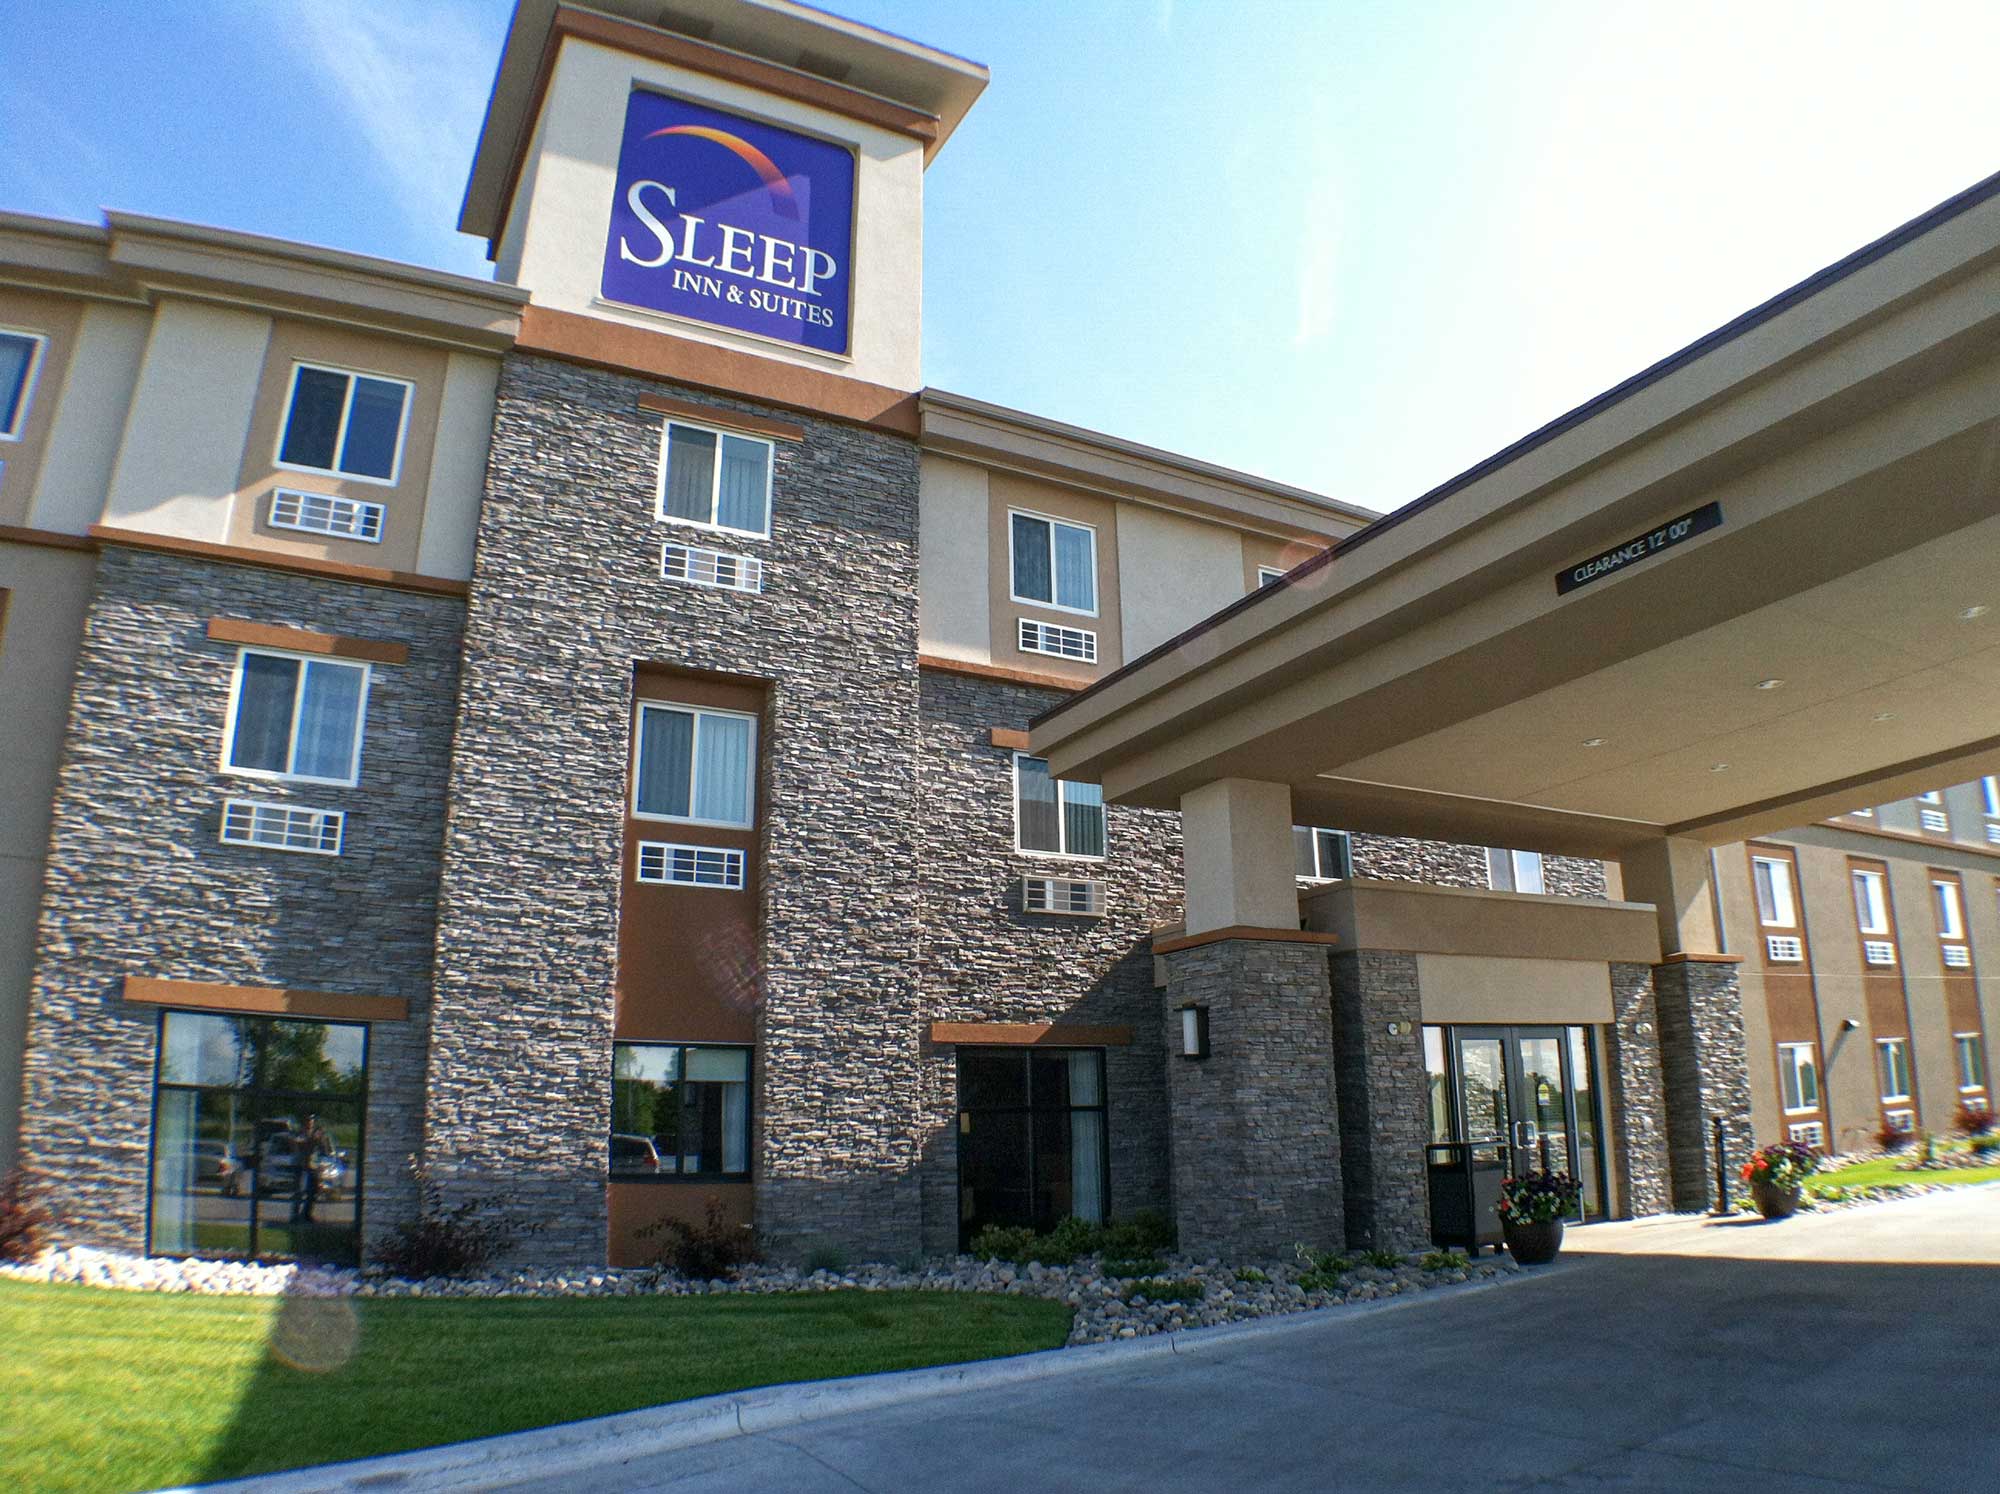 An exterior image of Sleep Inn & Suites in Grand Forks, ND